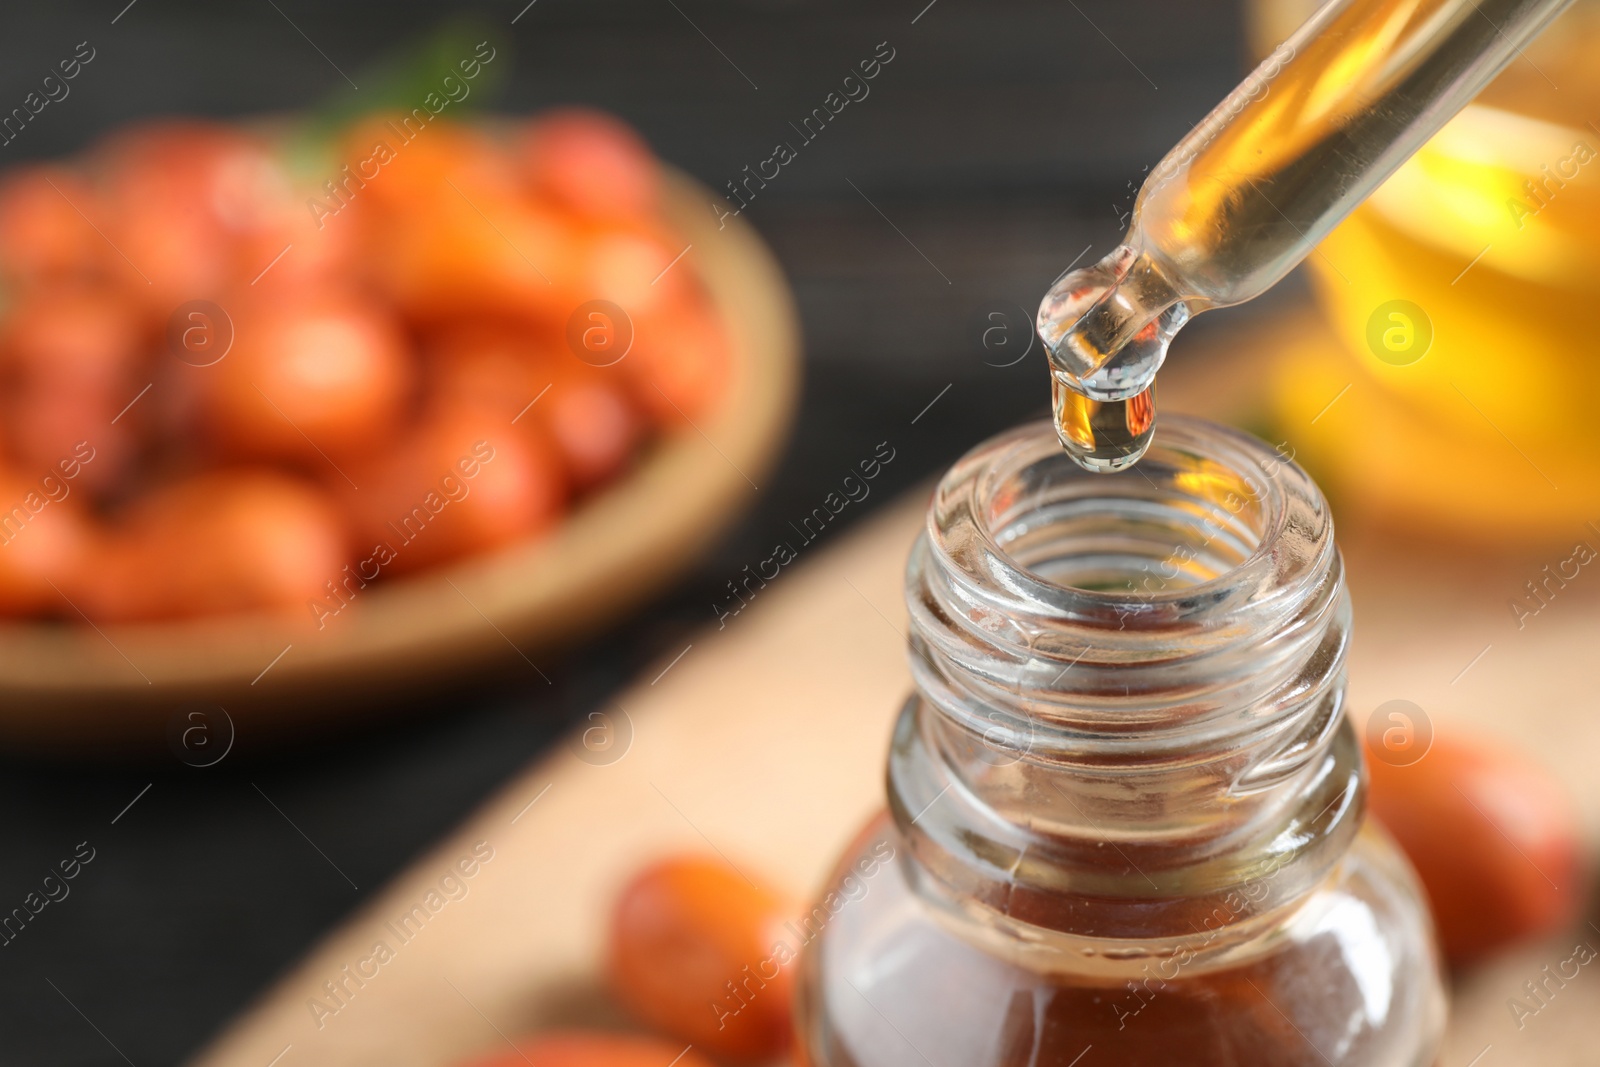 Photo of Dripping jojoba oil from pipette into bottle on blurred background, closeup. Space for text